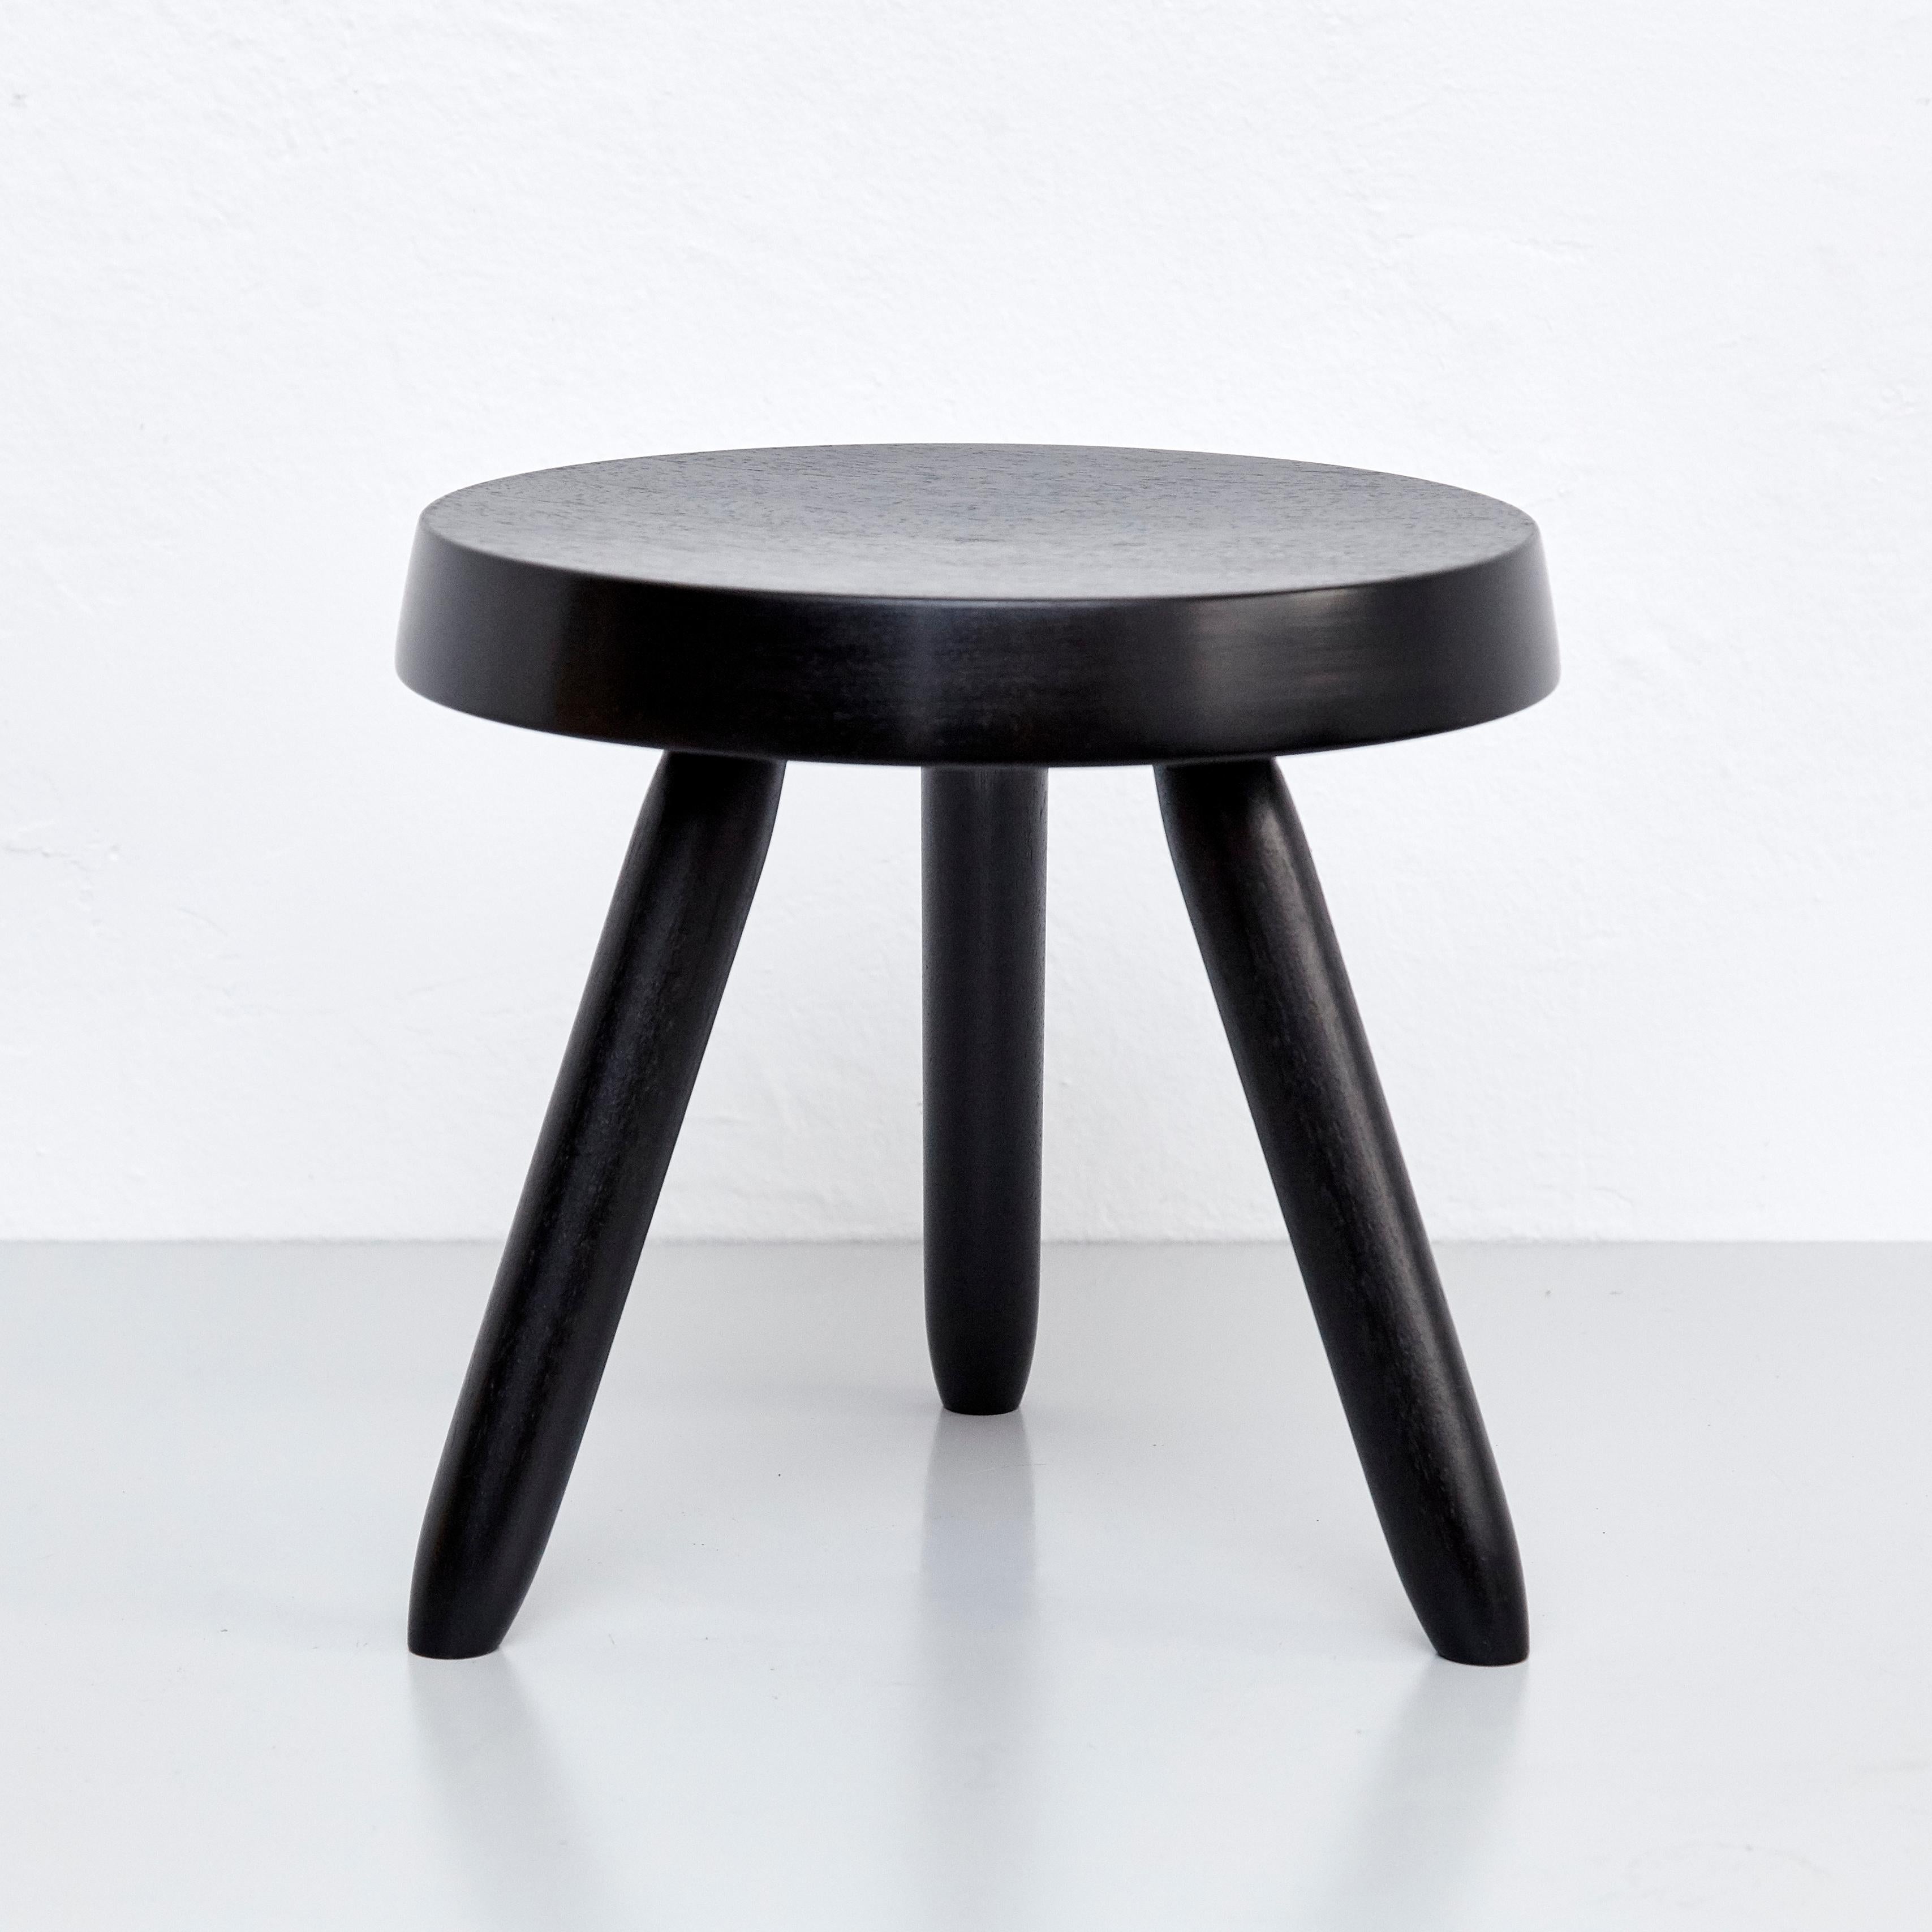 Stool designed in the style of Charlotte Perriand.
Made by unknown manufacturer.

We offer free worldwide shipping for this piece.

In good original condition, preserving a beautiful patina, with minor wear consistent with age and use. 

Charlotte